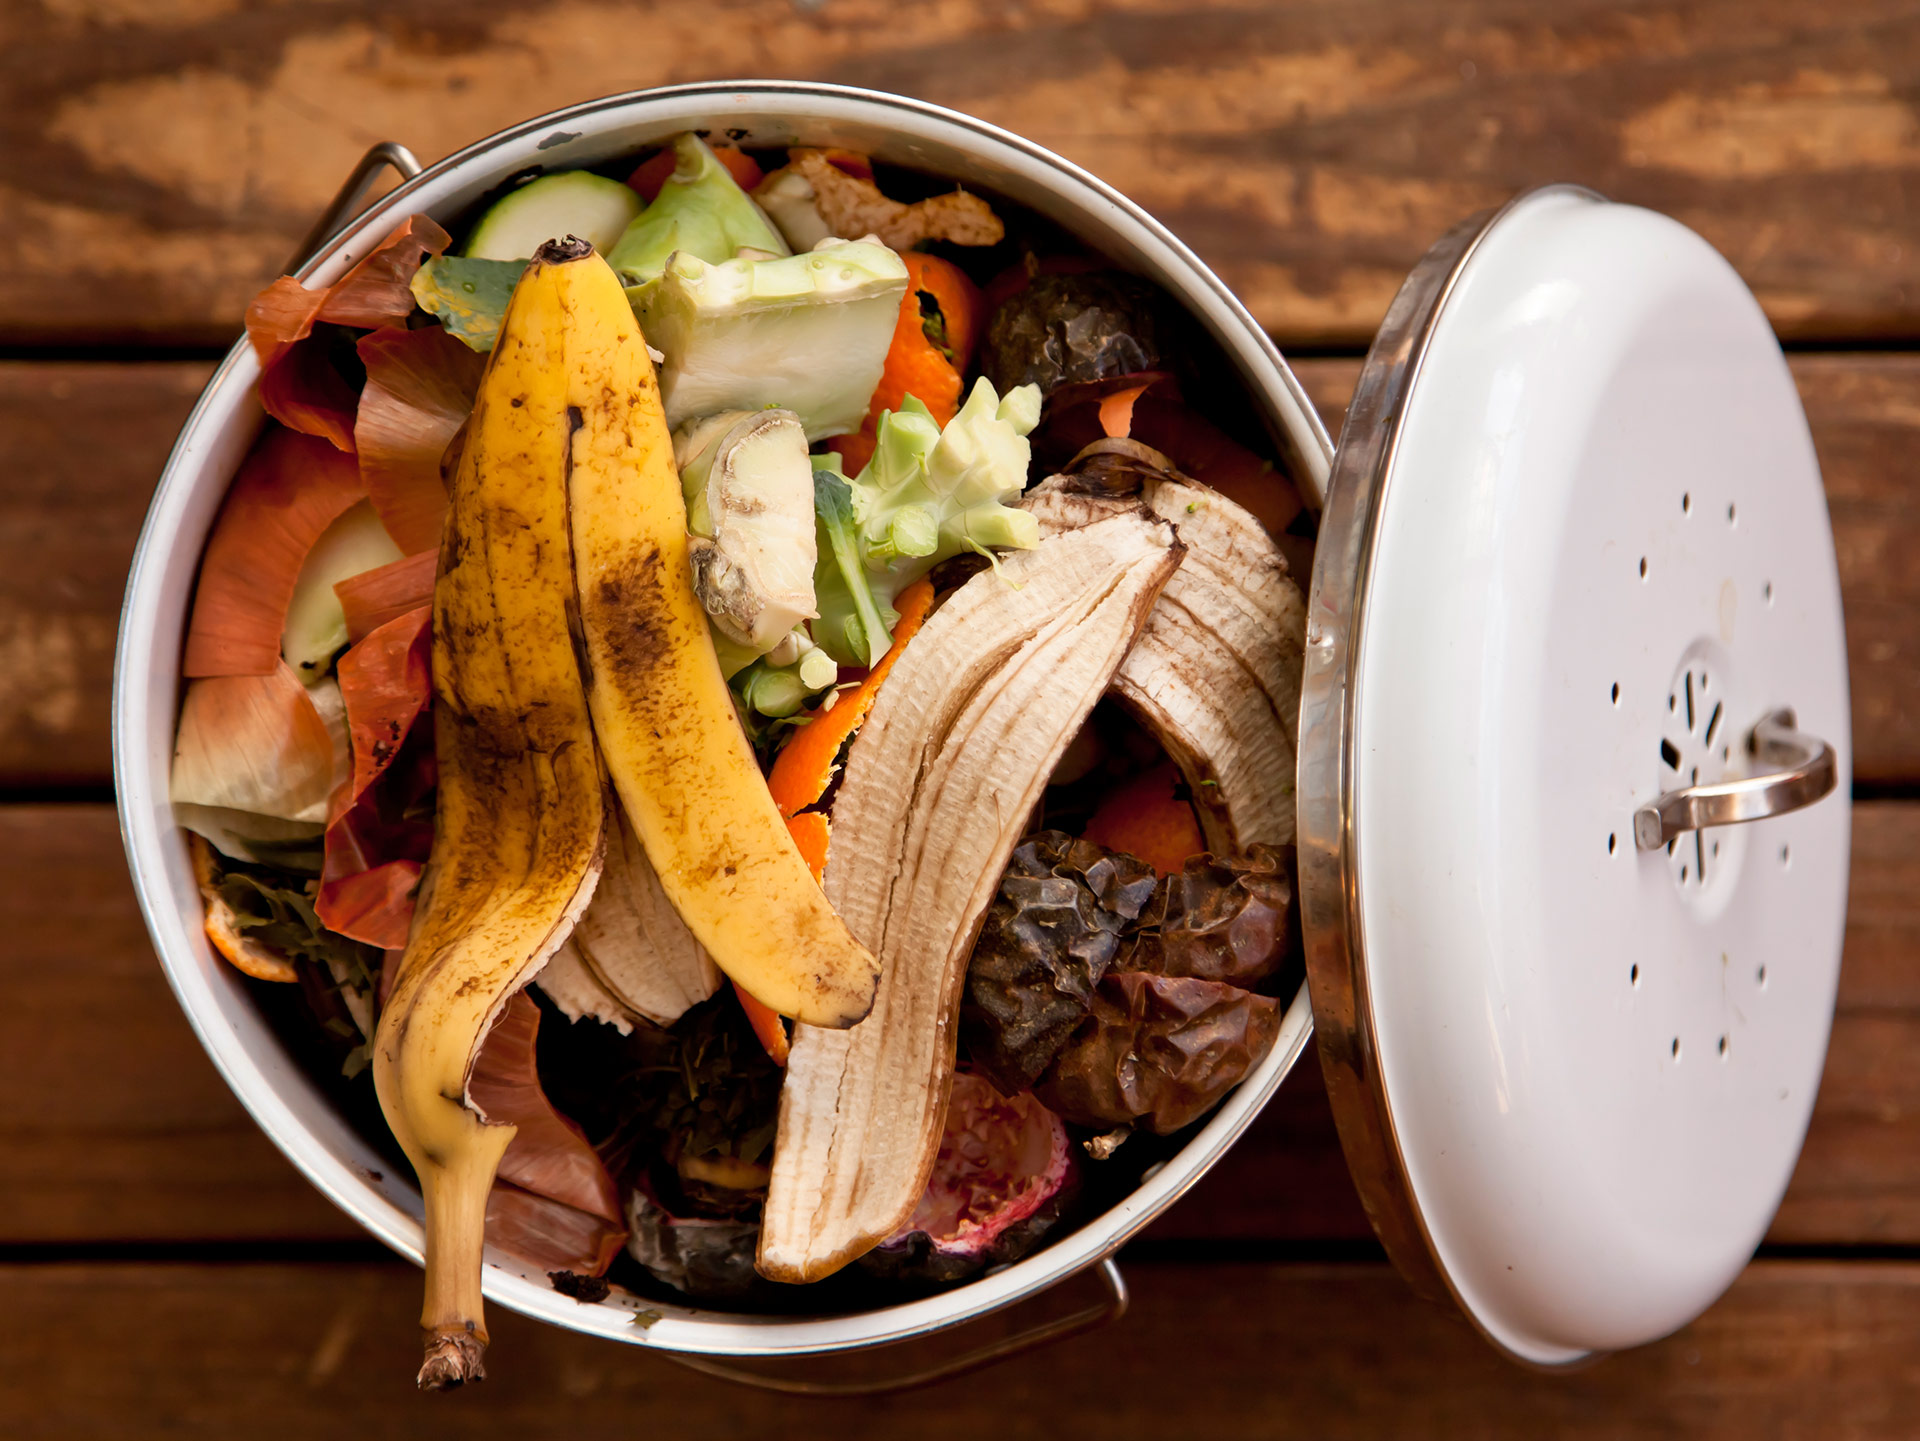 Fool proof way to save money? Reduce your food waste